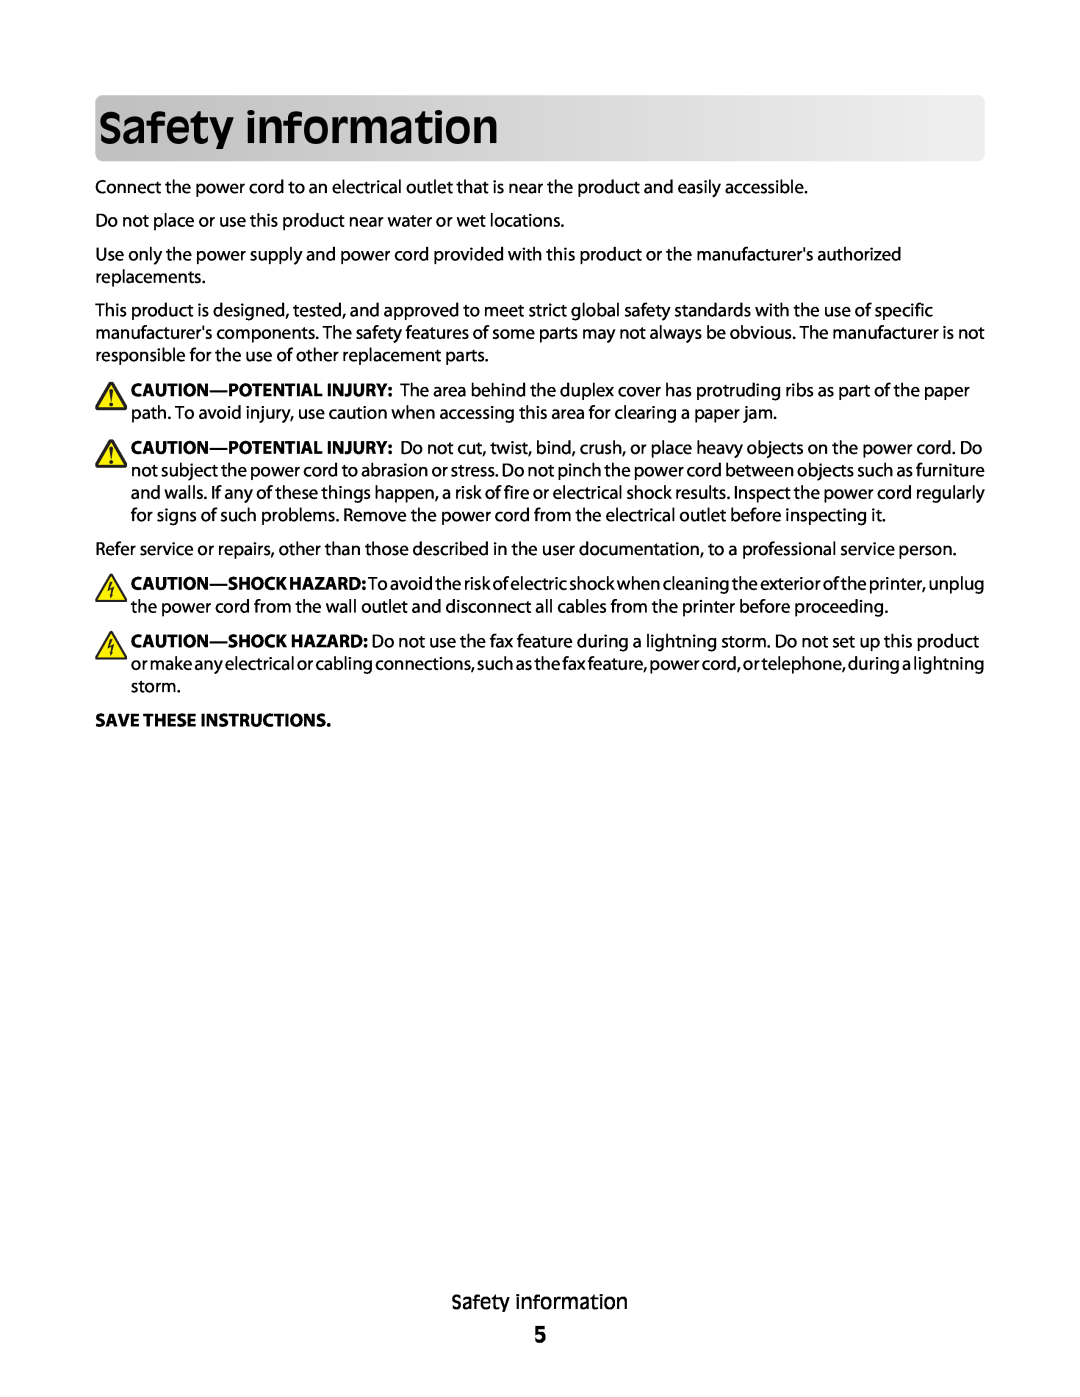 Lexmark 301, S500, 30E manual Safetyinformation, Save These Instructions 